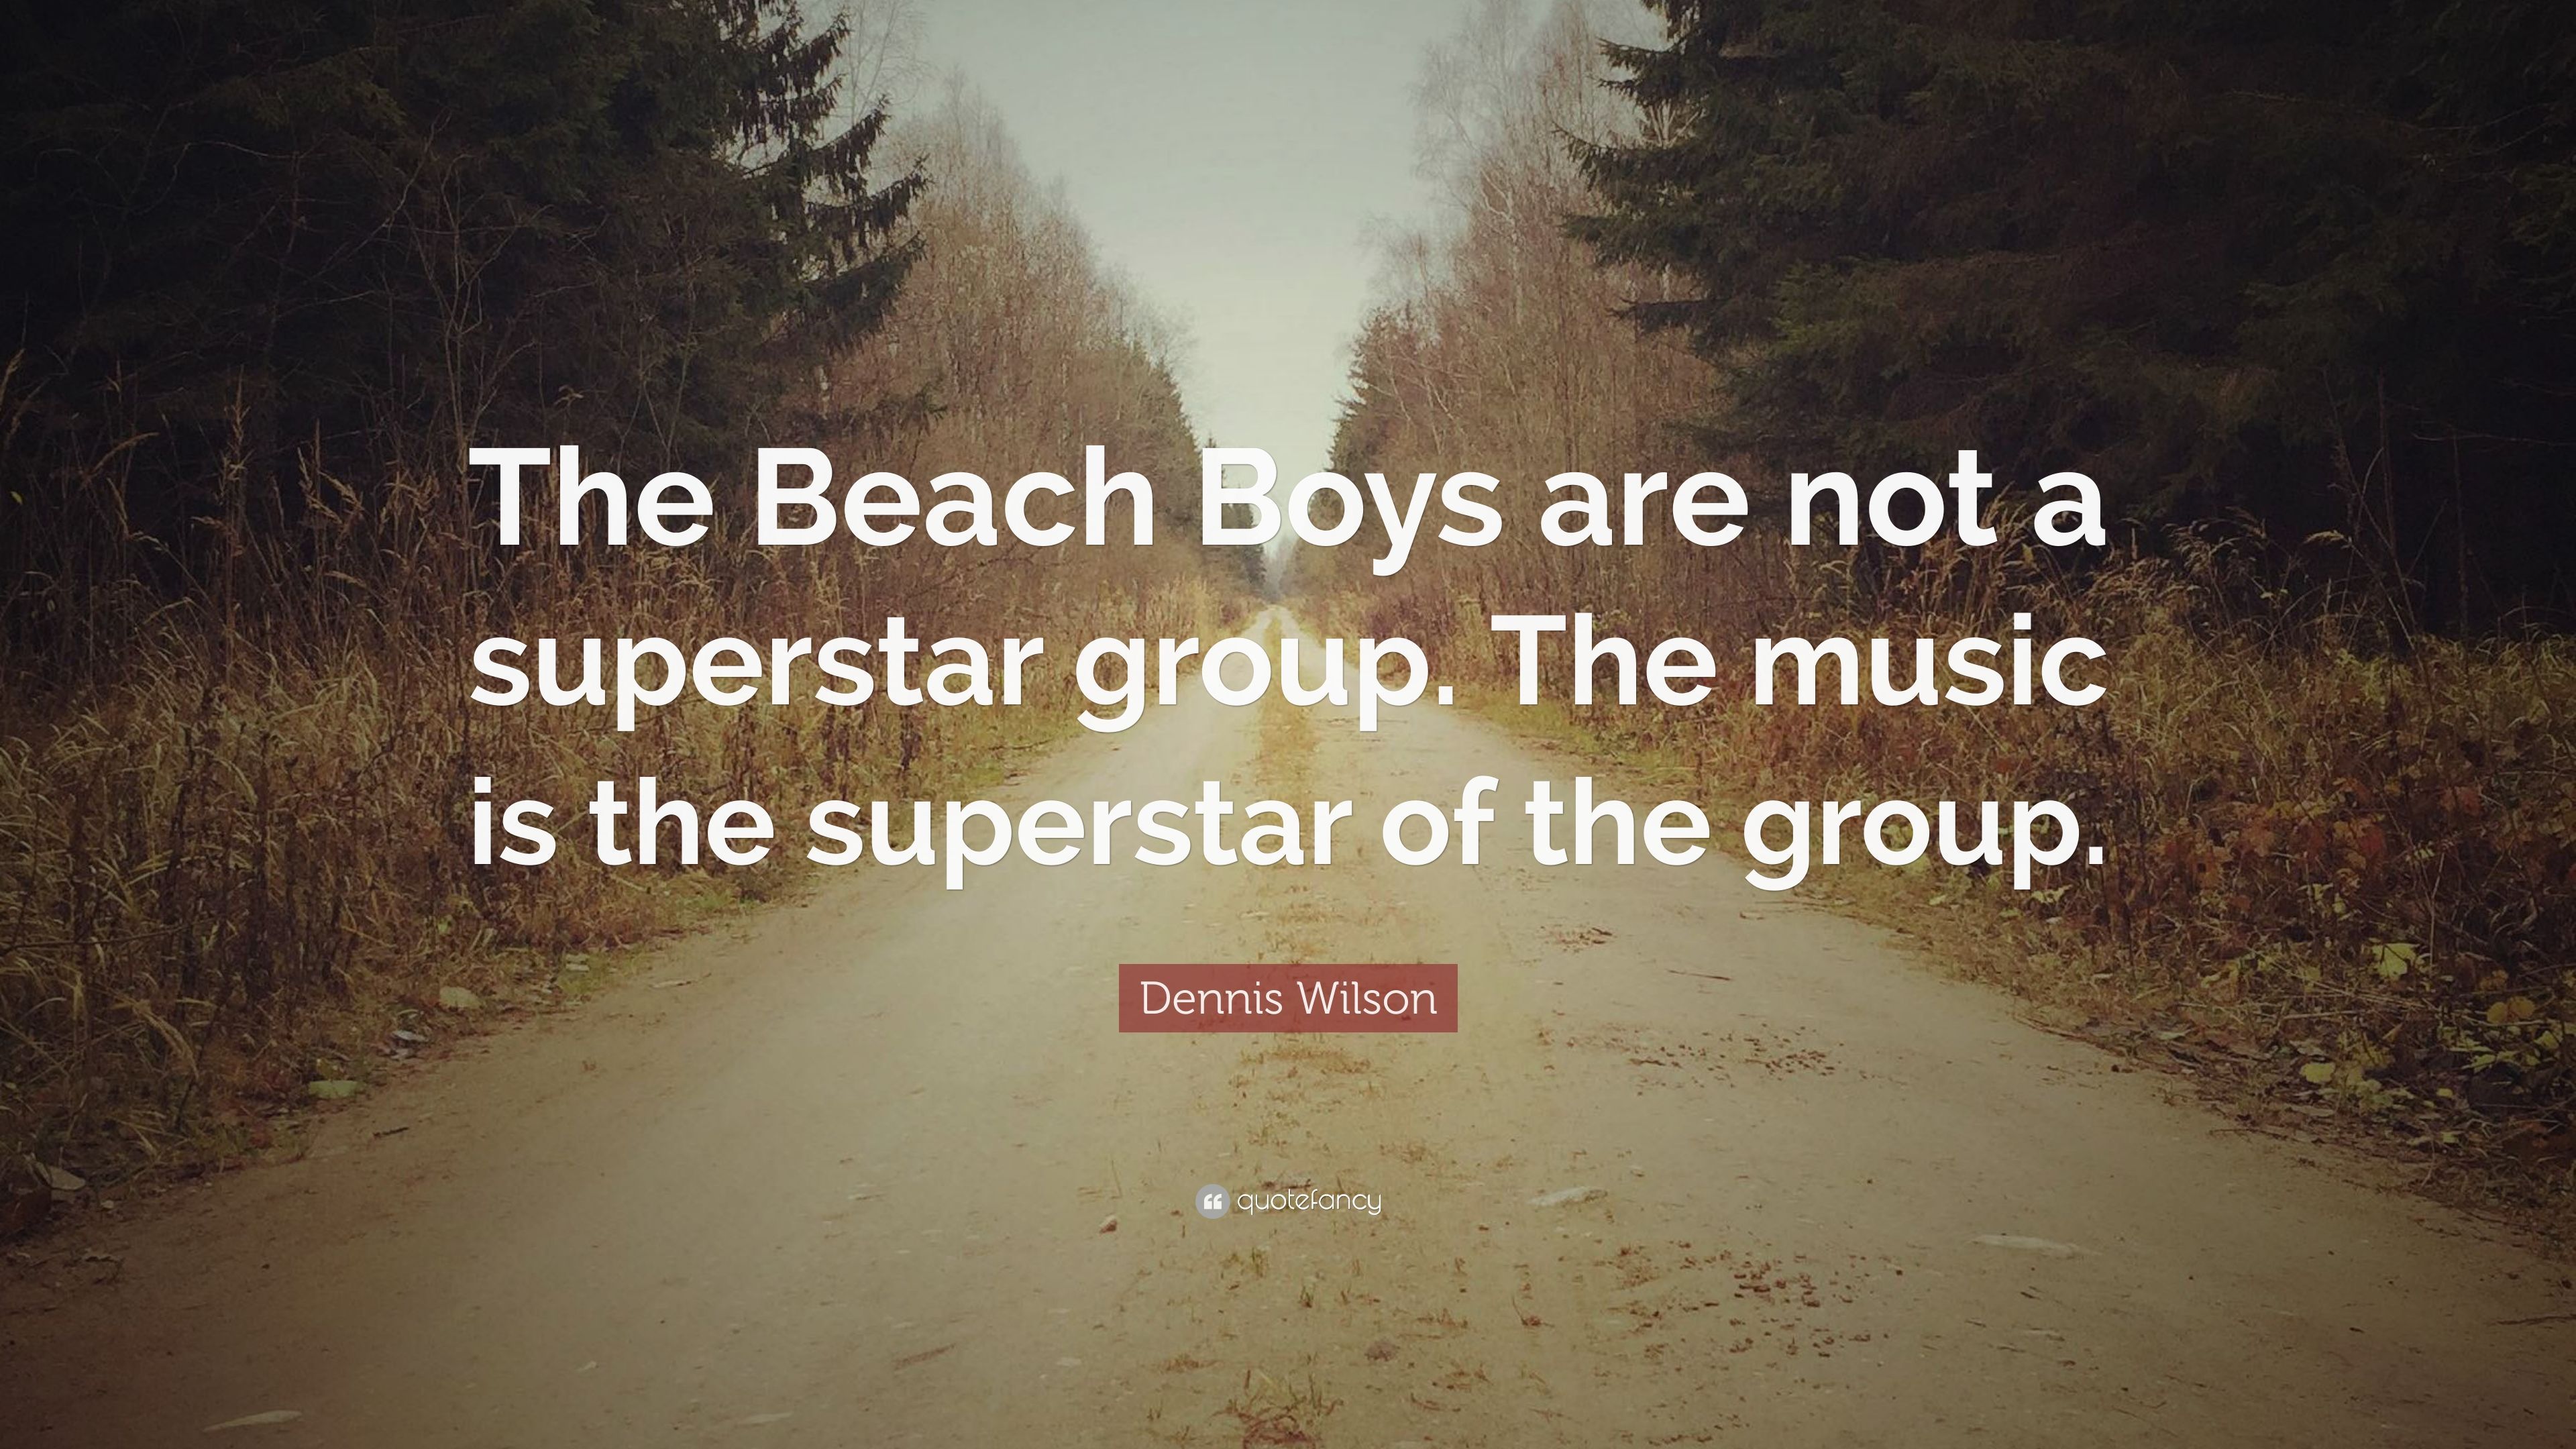 Dennis Wilson Quote: “The Beach Boys are not a superstar group